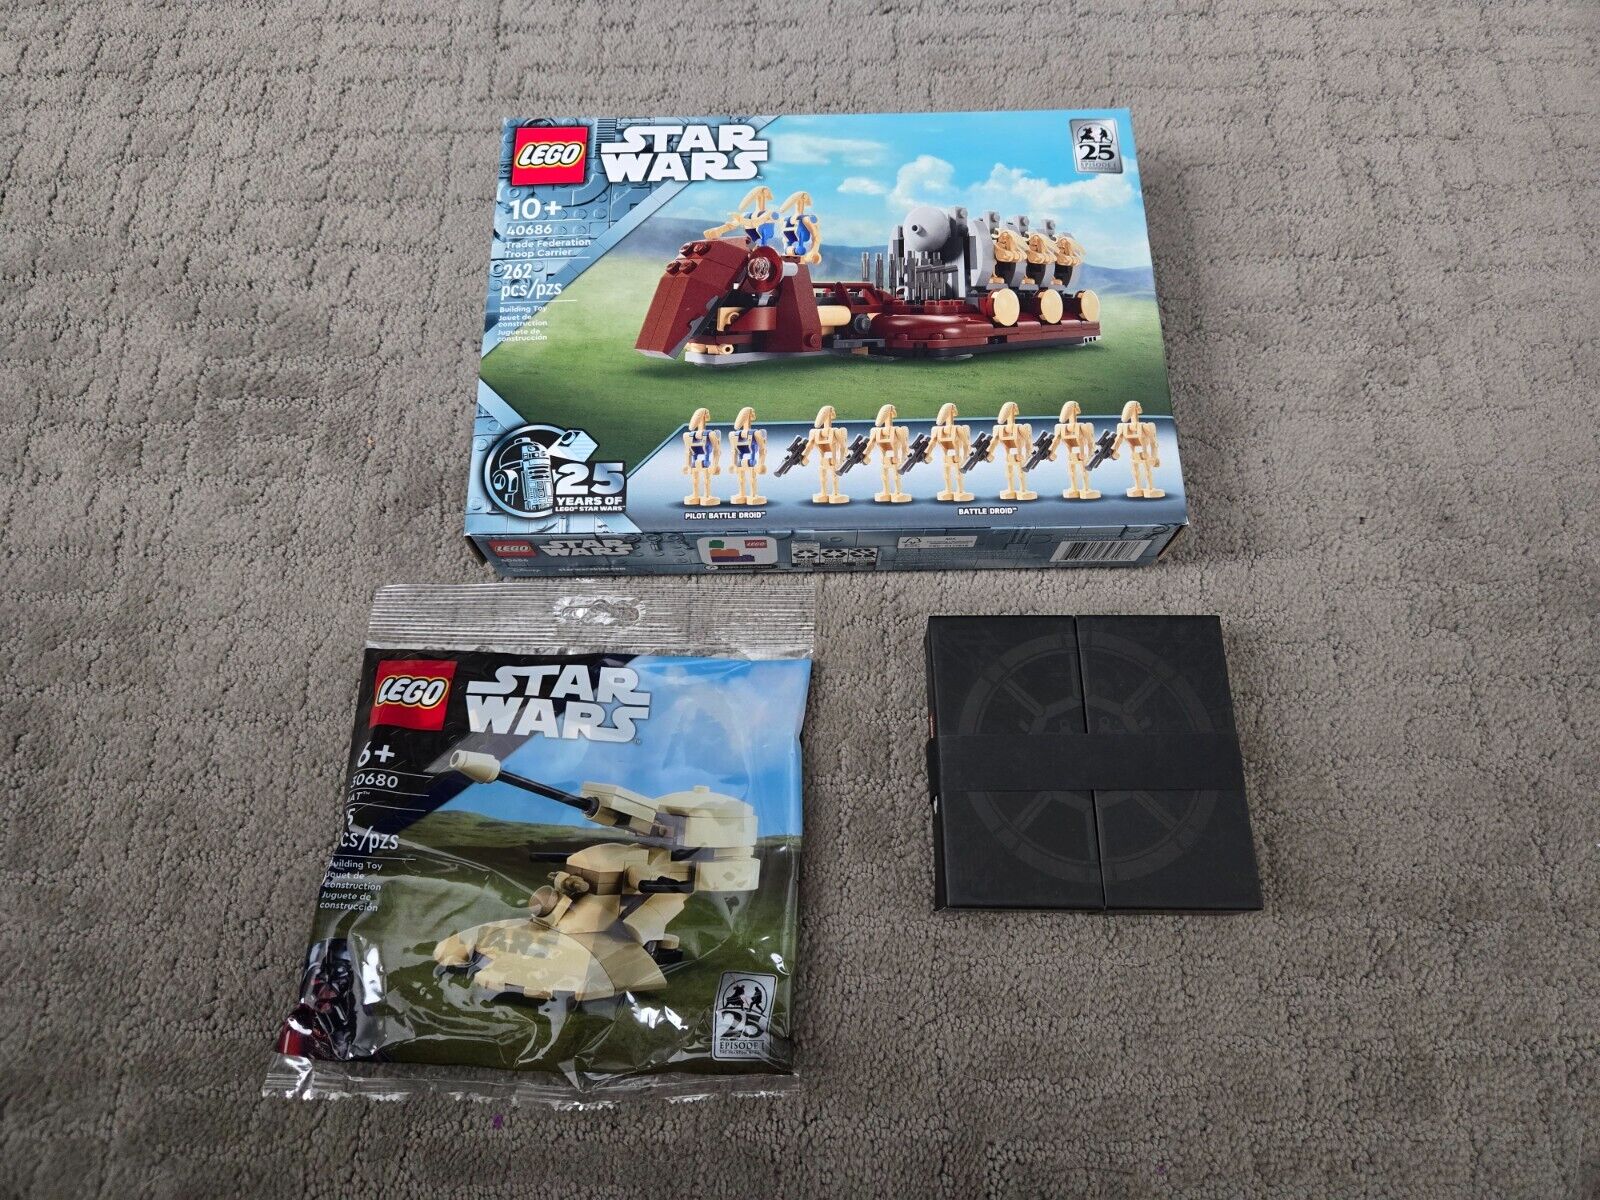 Lego Star Wars 40686 Federation Troop Transport + 30680 + Coin Lot - Exclusive